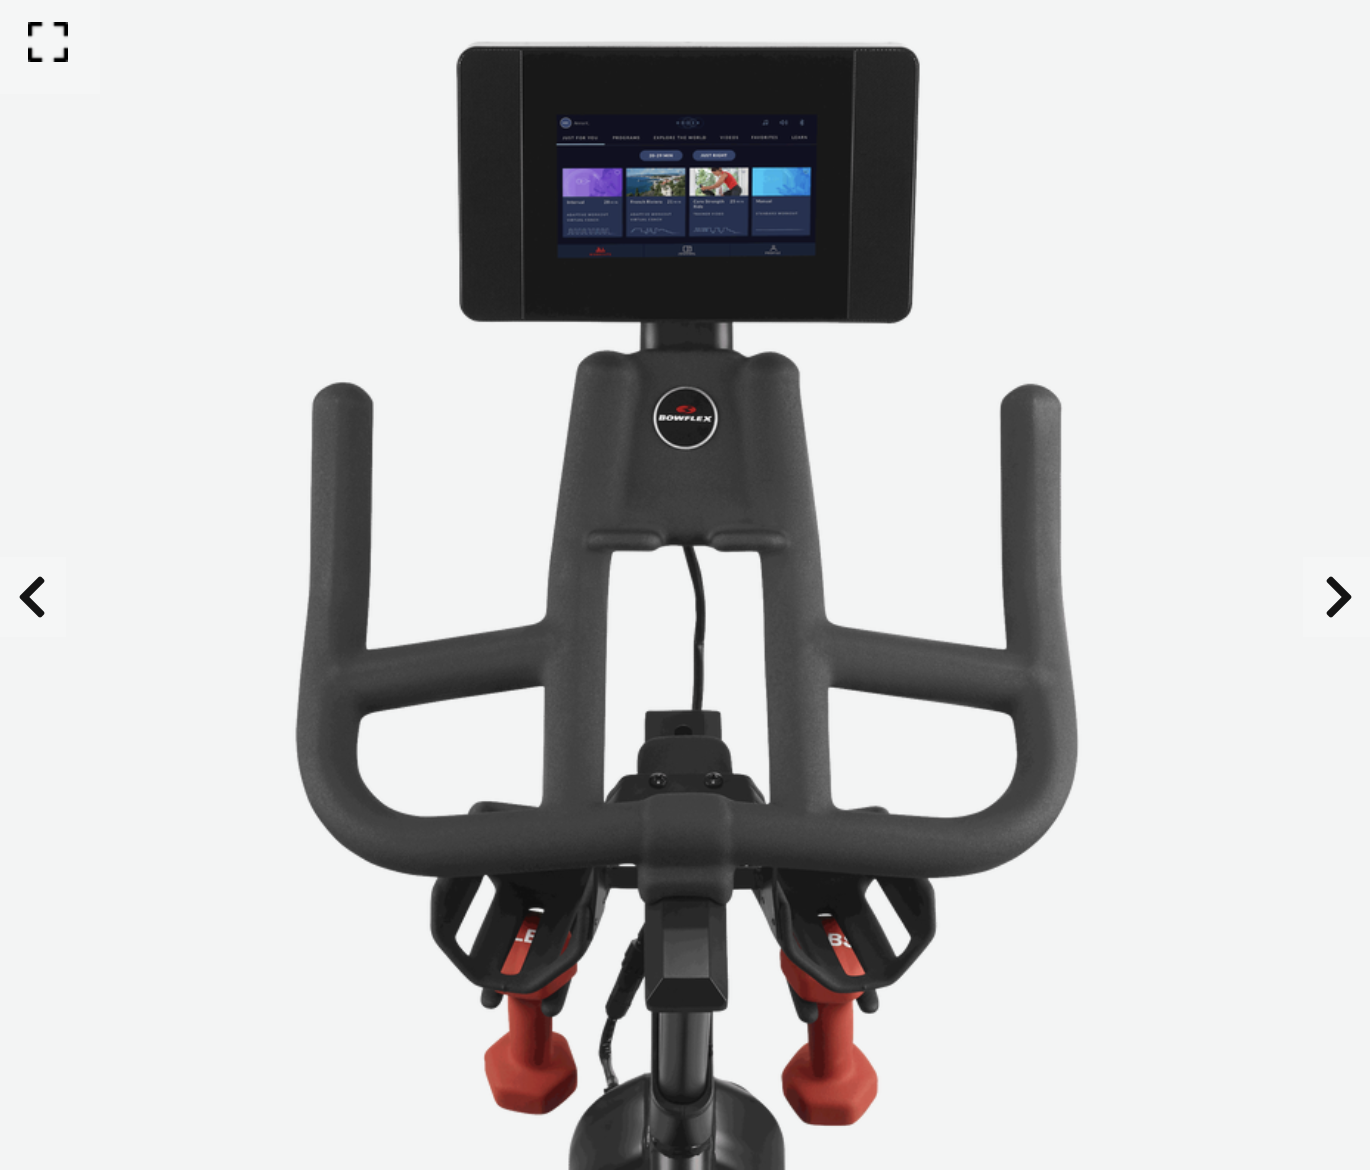 Bowflex C7 Bike Console With 7" Touch Screen Display